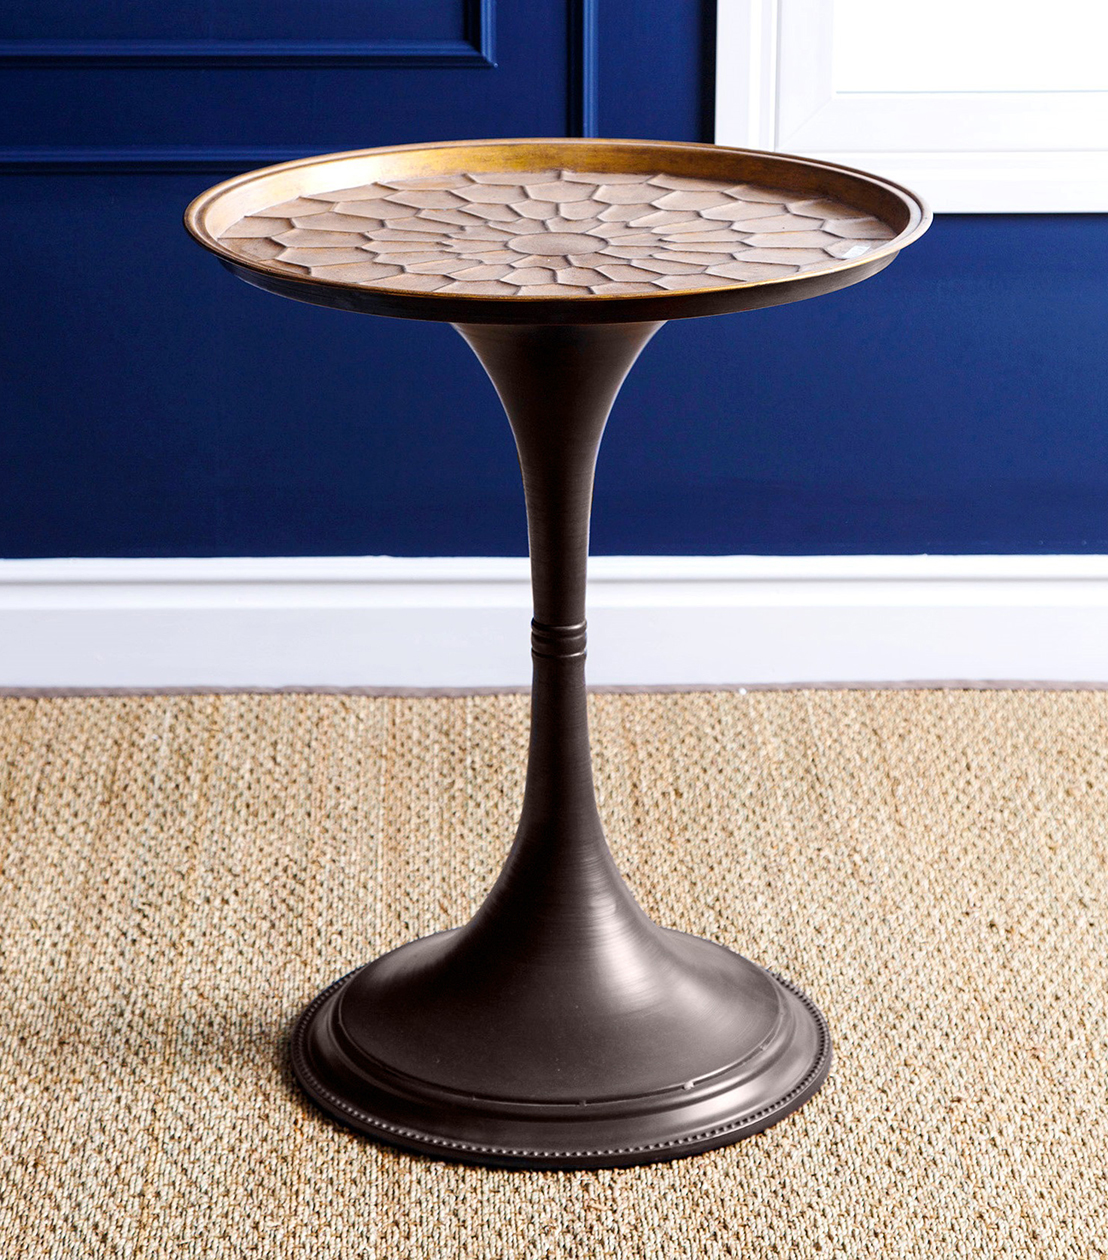 Moroccan gold table with stylized top by Abbyson Living